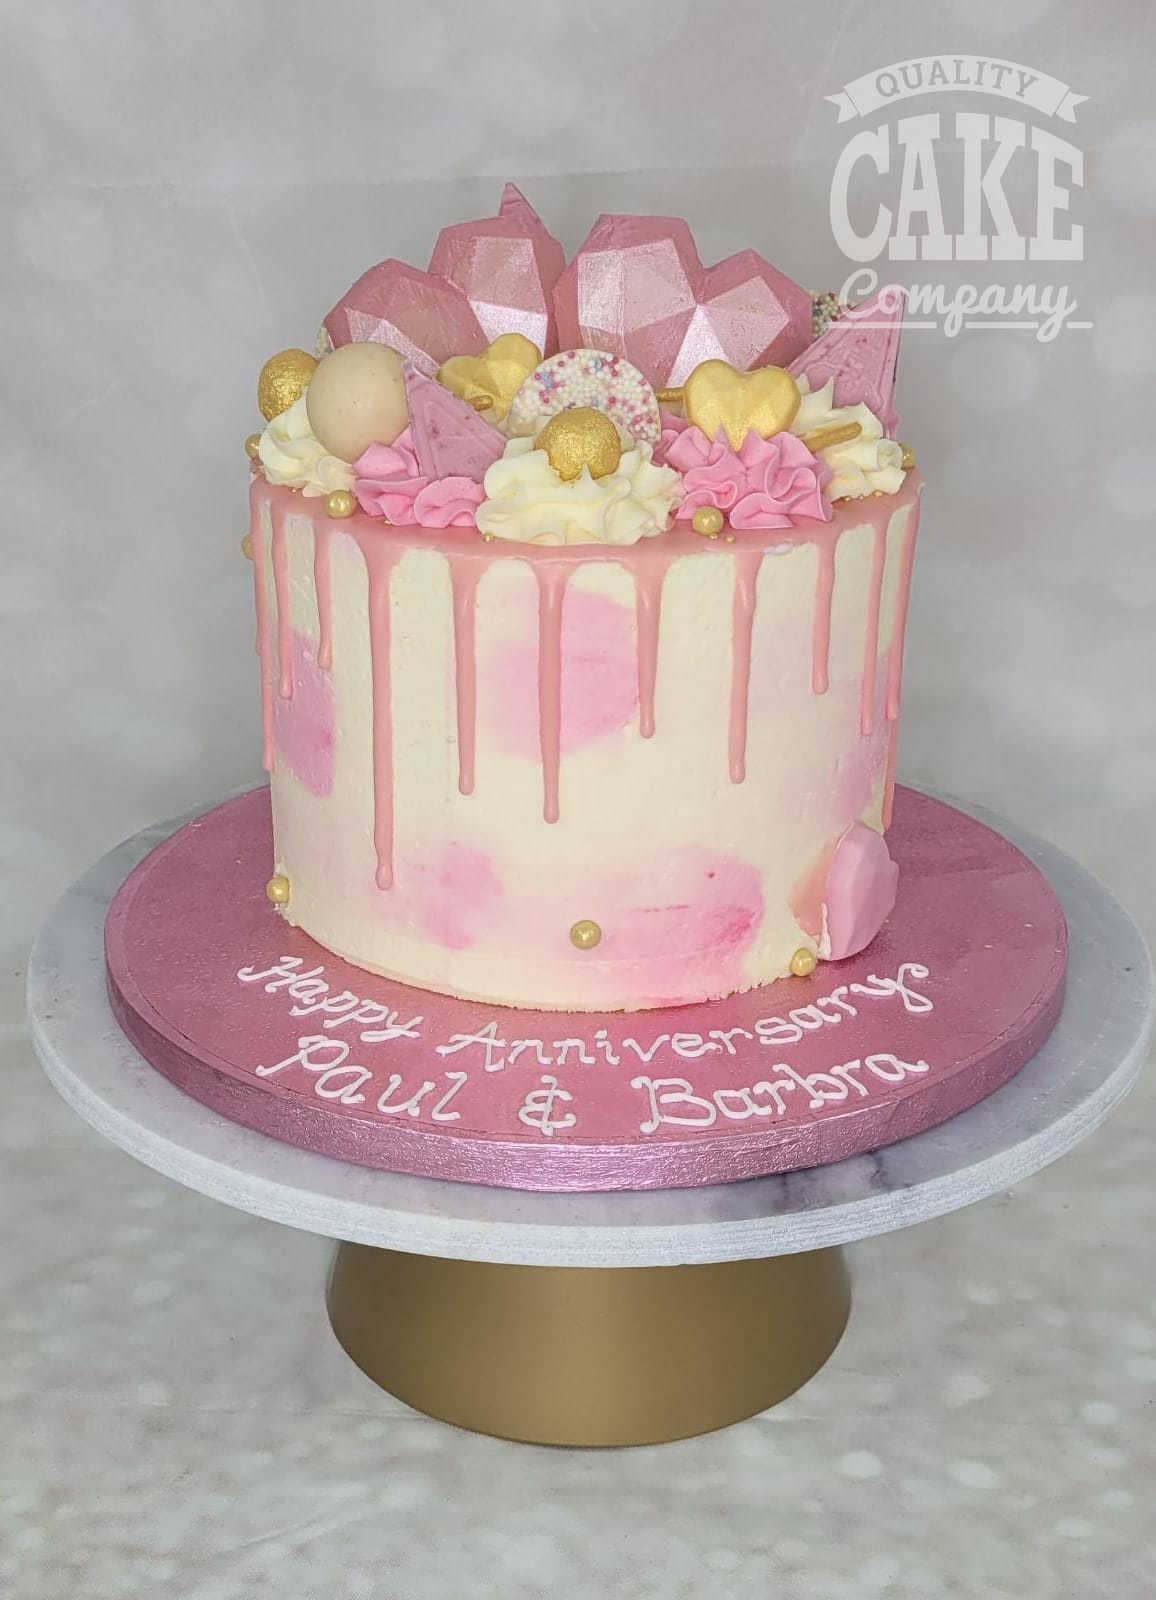 FEATURE Pretty in Pink Cake – Crumbs & Doilies